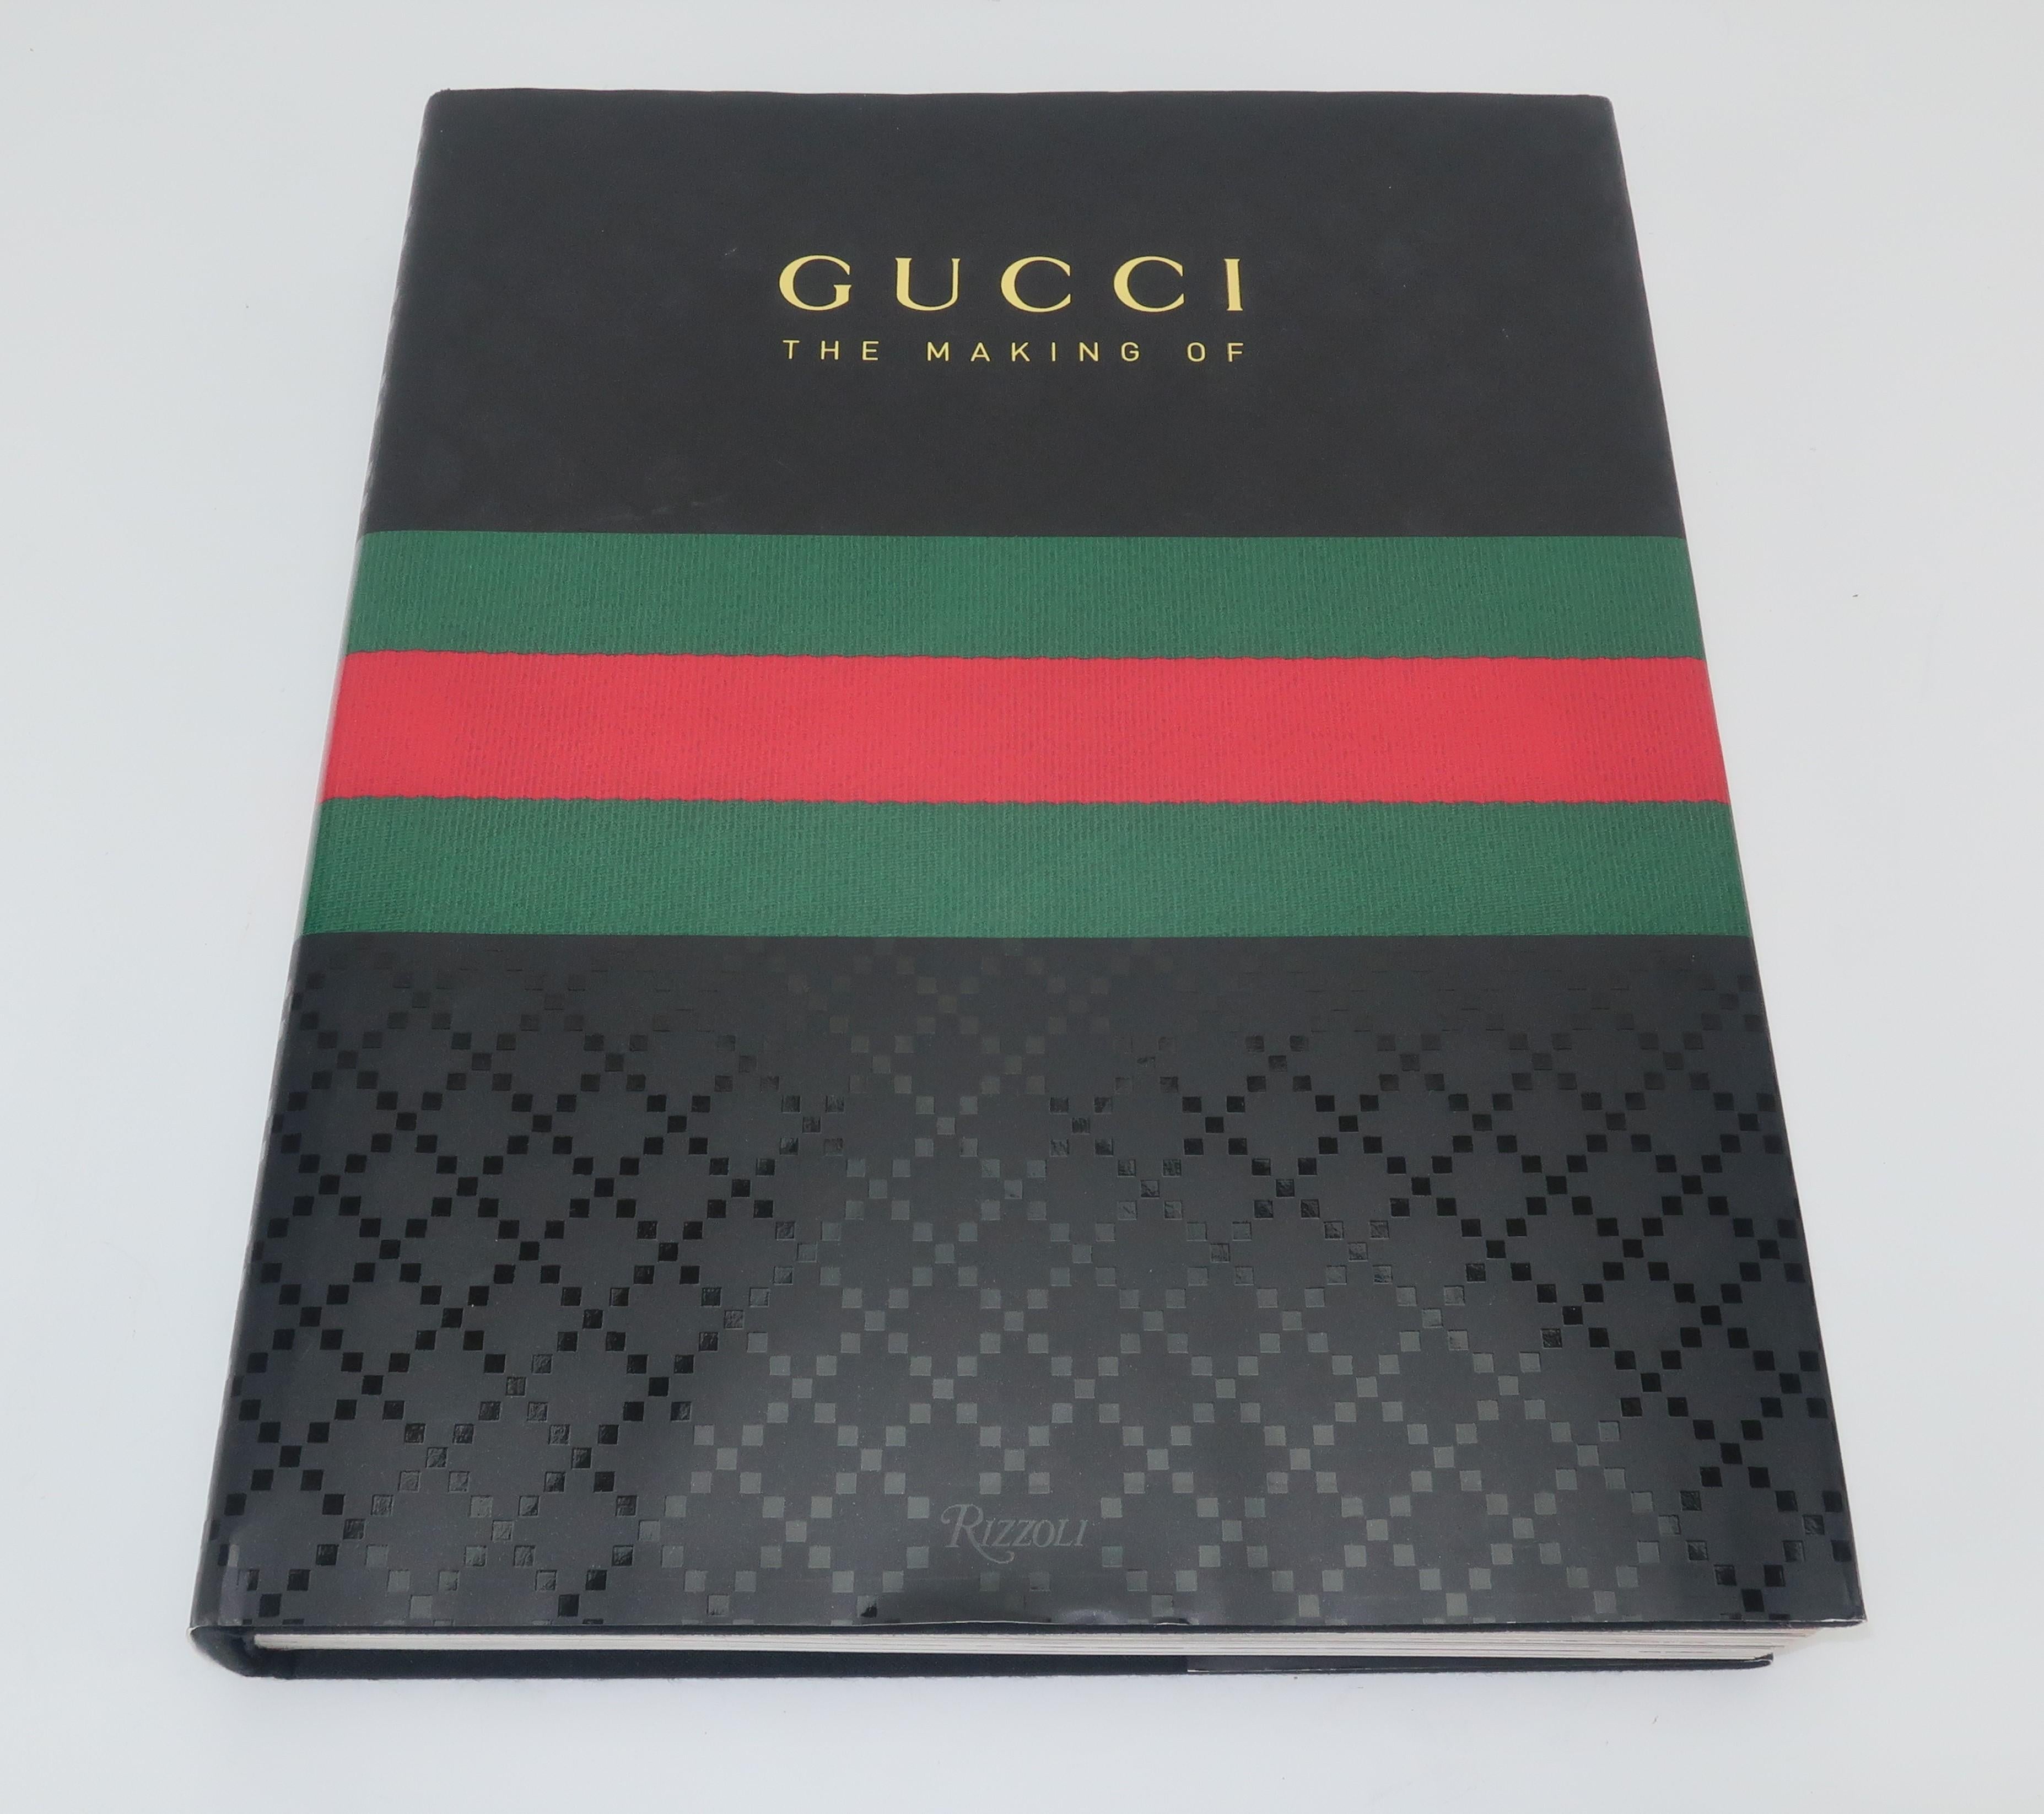 Feast your eyes on 348 pages of history, imagery and commentary about a venerable Italian fashion house in the beautifully published coffee table book, Gucci: The Making Of, printed in 2011 by Rizzoli and edited by Gucci Creative Director, Frida